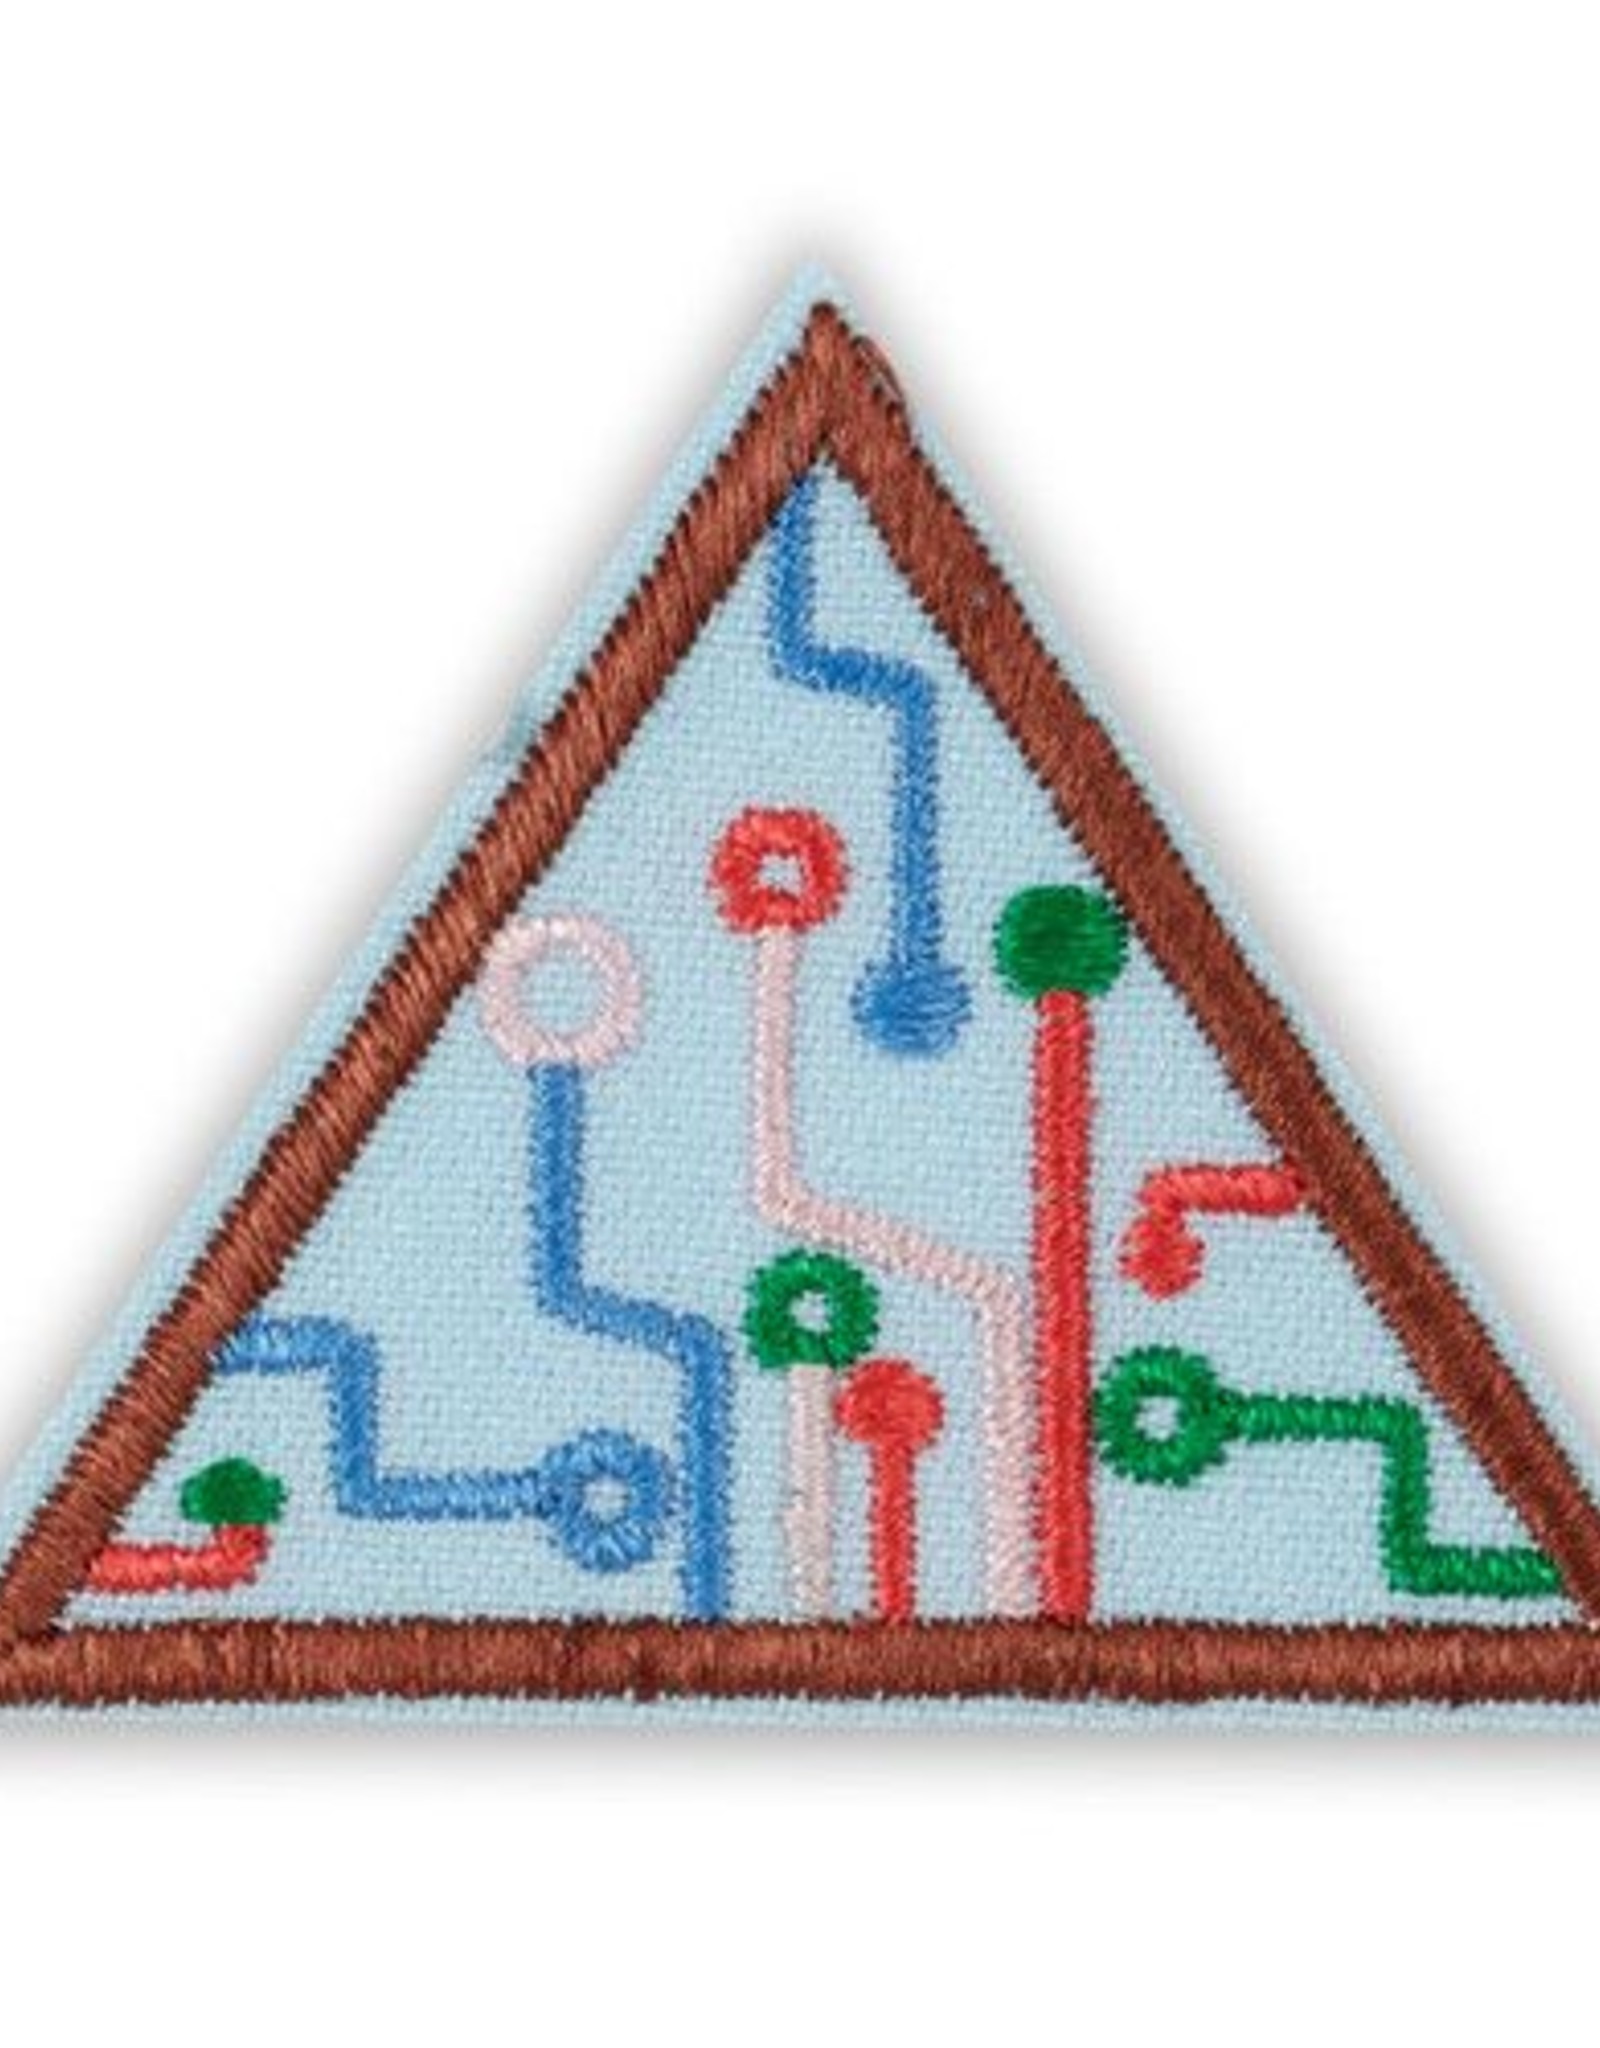 GIRL SCOUTS OF THE USA Brownie Think Like a Programmer Computer Science Journey Award Badge